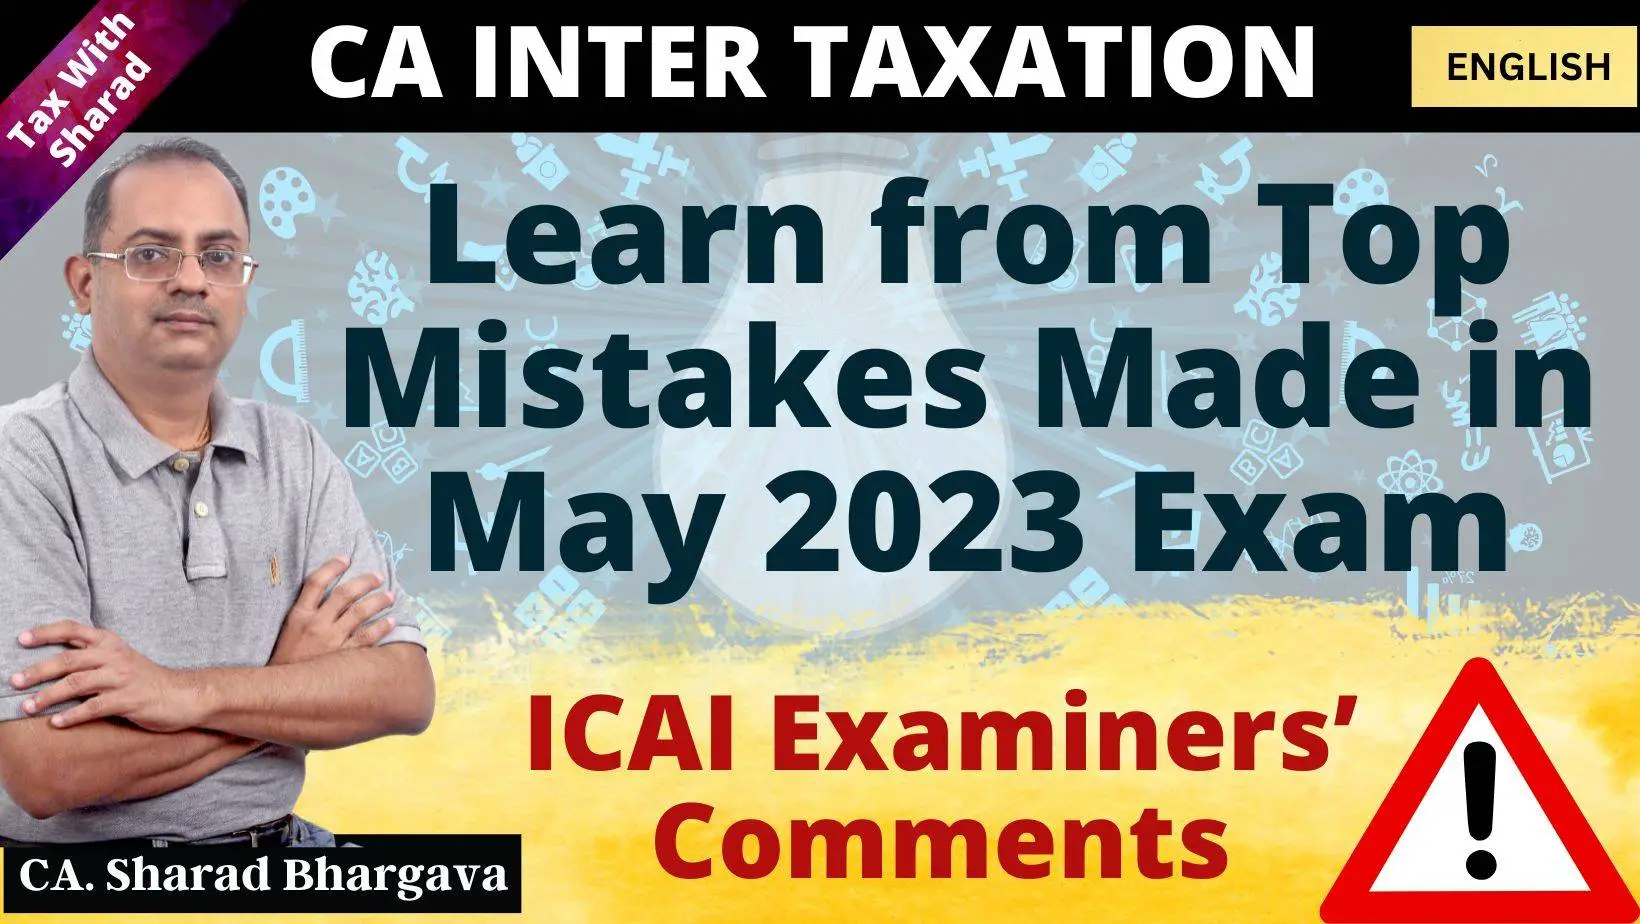 Learn from Top Mistakes made in CA Inter May 2023 Tax Exam / Examiner Comments / CA. Sharad Bhargava